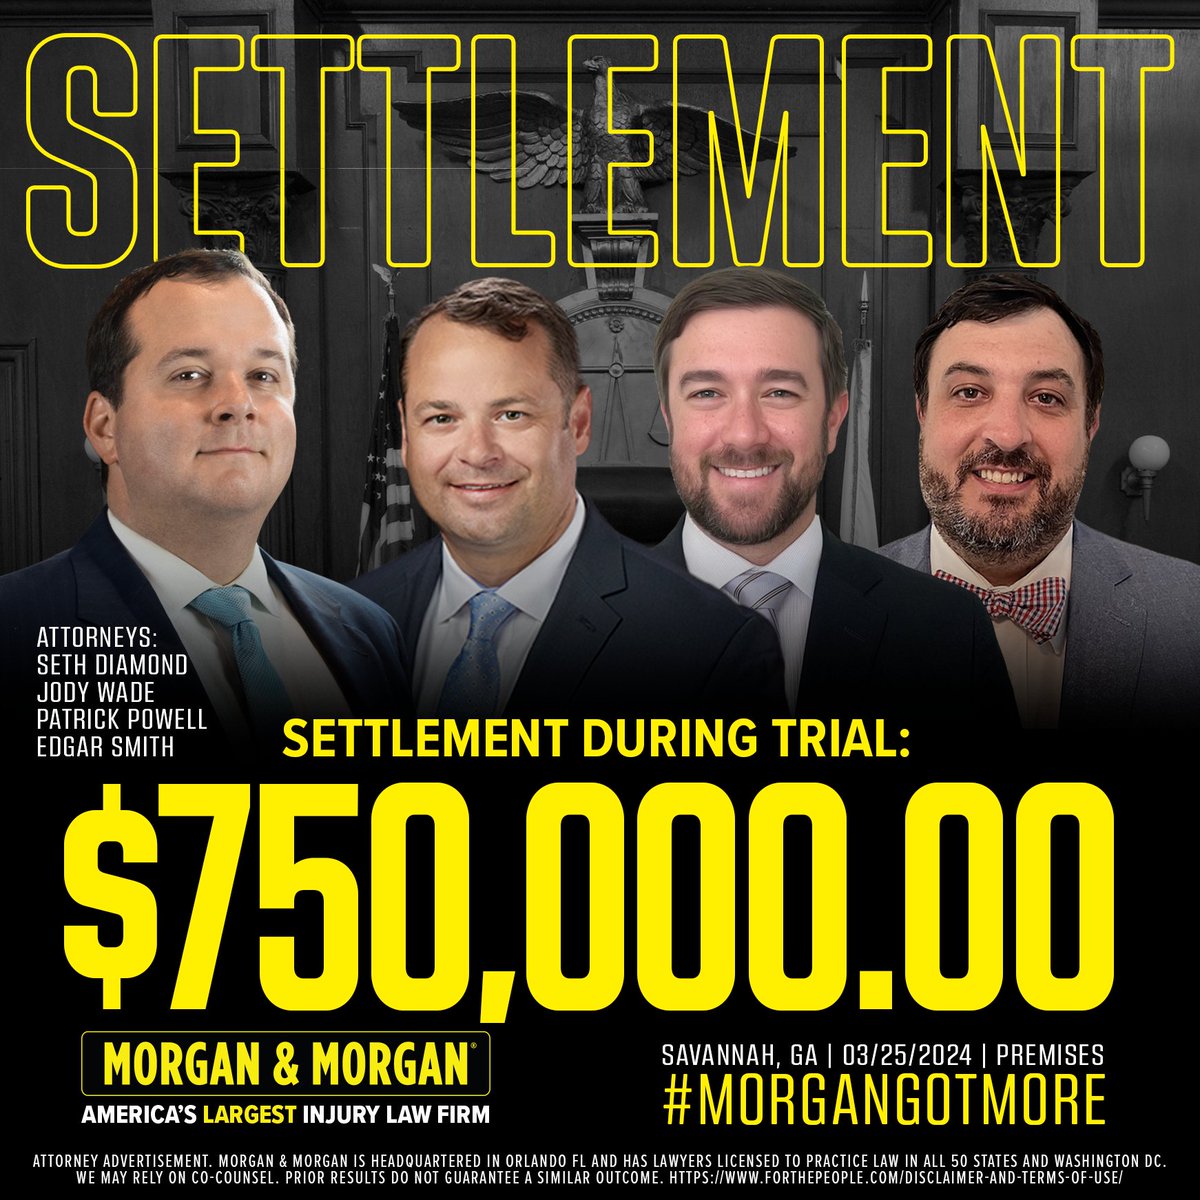 Congratulations to Seth Diamond, Jody Wade, Patrick Powell and Edgar Smith for securing a $750,000.00 settlement during trial for our client in Savannah! #MorganGotMore #ForThePeople